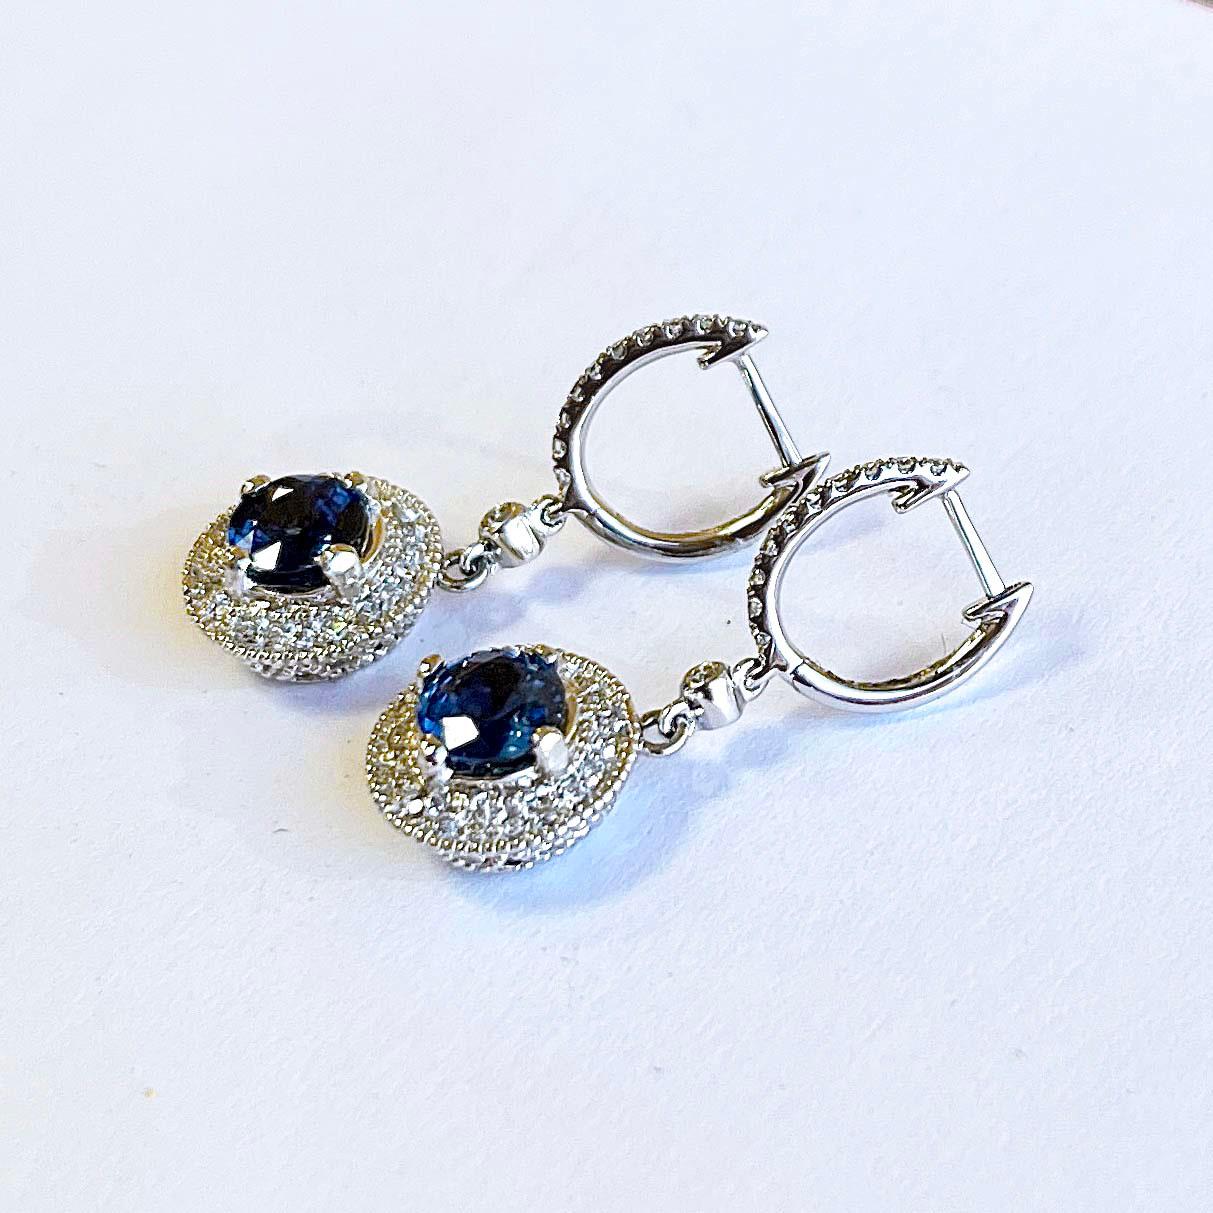 Vitolo 18 Karat Gold Diamond Drop Earrings with Blue Sapphire In New Condition For Sale In Los Angeles, CA